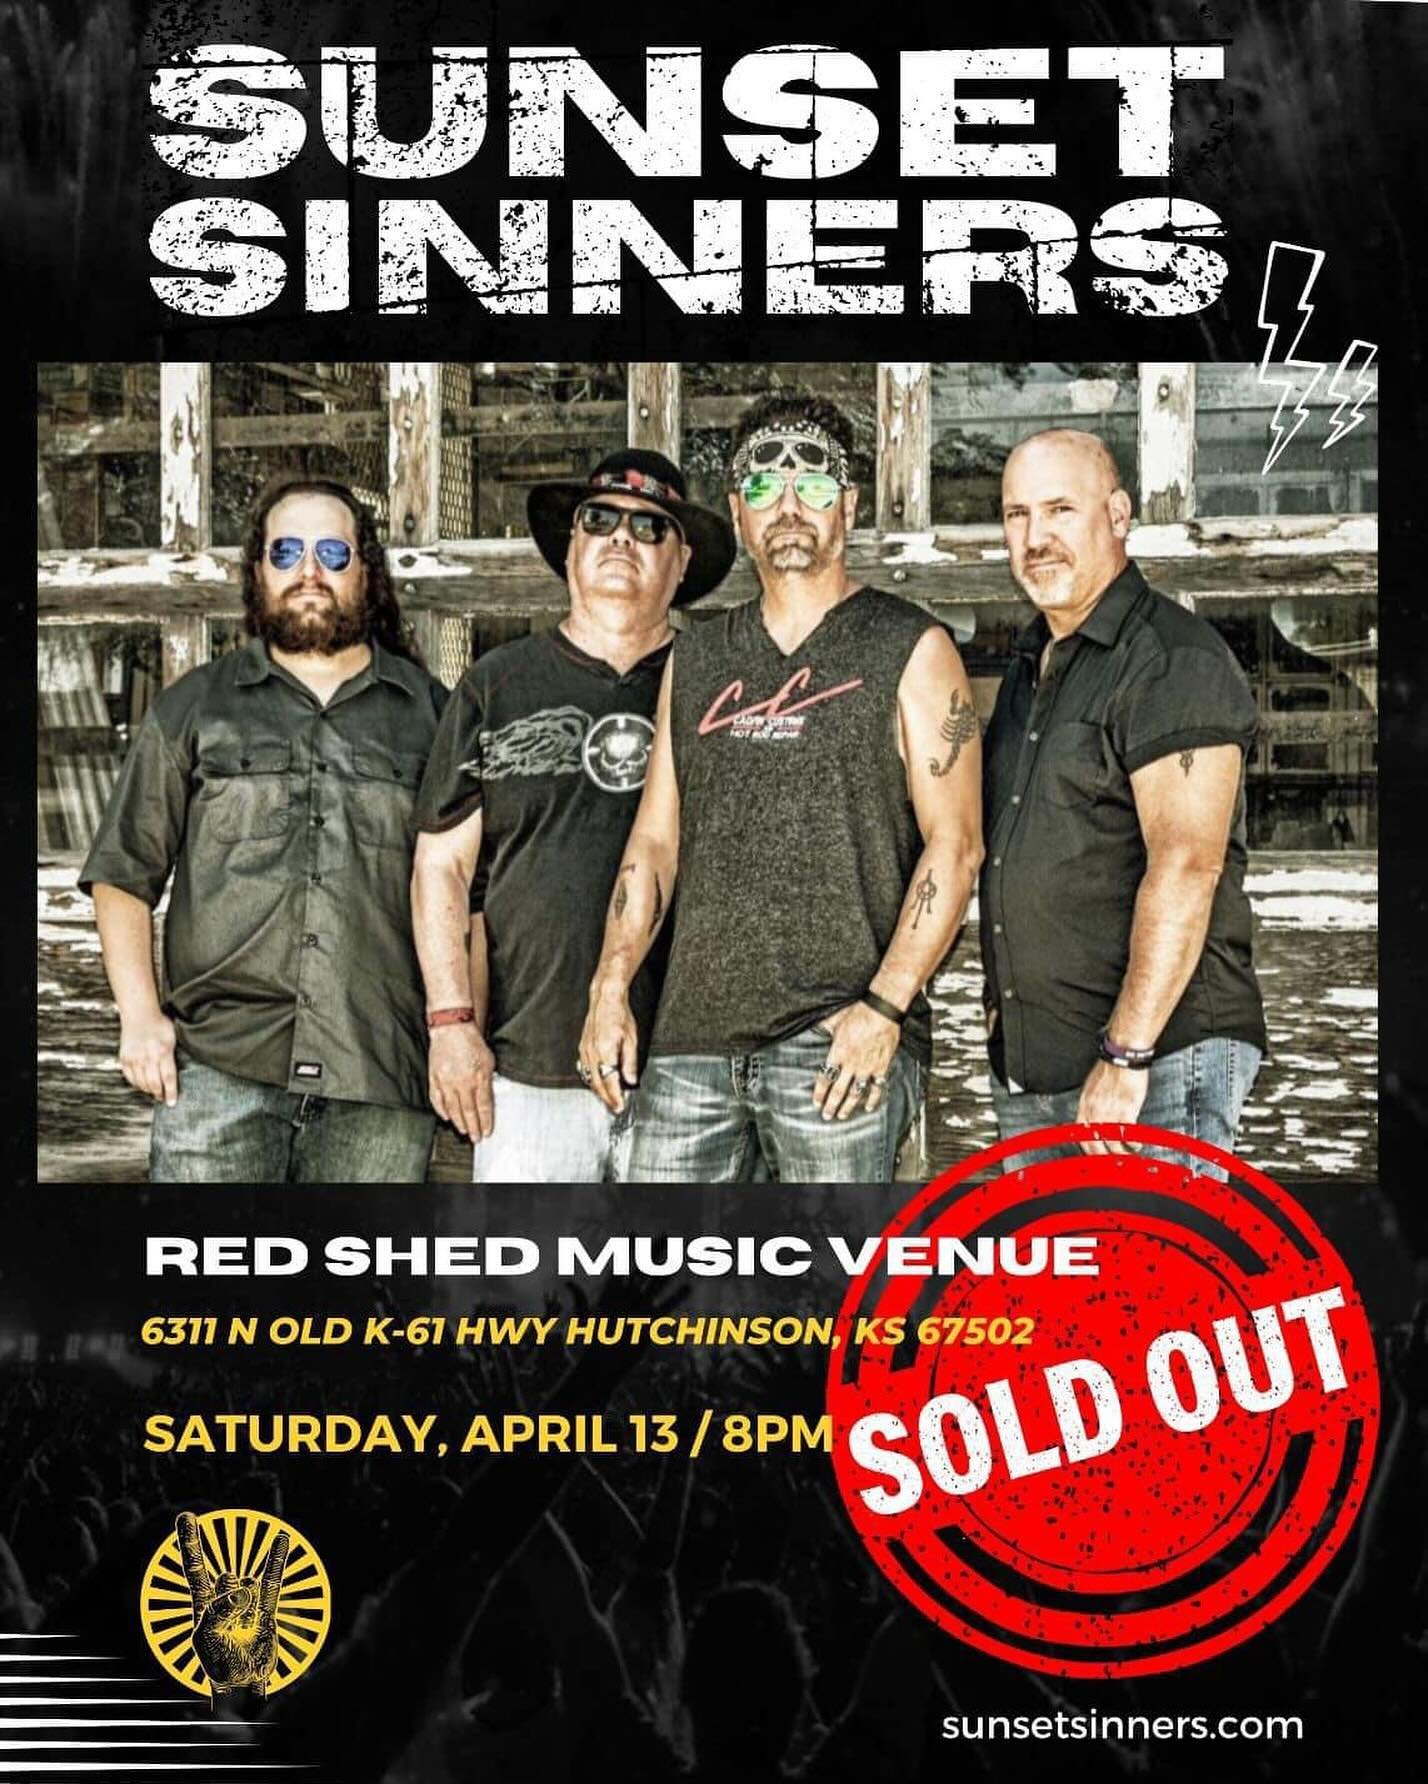 Sinner Nation - We&rsquo;re ready to Rock our asses off at The Red Shed Music Venue tonight! This show is Sold Out but limited tickets will be available at the door. Let&rsquo;s Gooo!